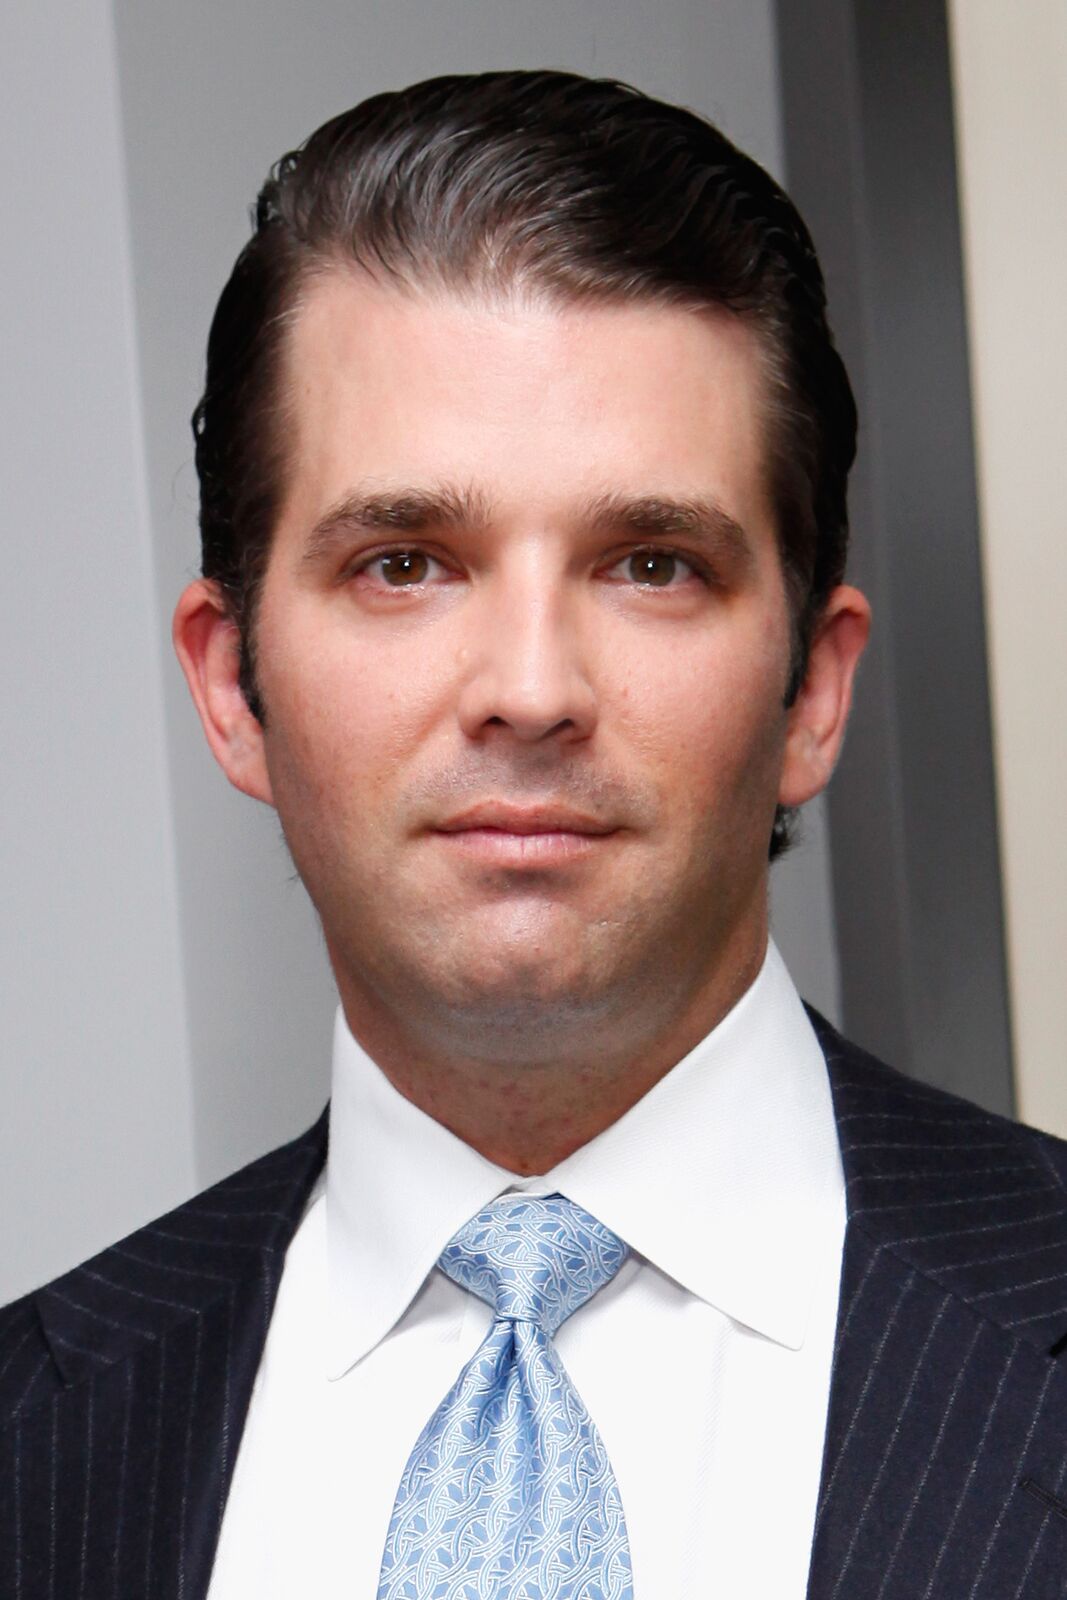 Donald Trump, Jr. poses at Trump Tower on May 3, 2012 in New York City | Photo: Getty Images